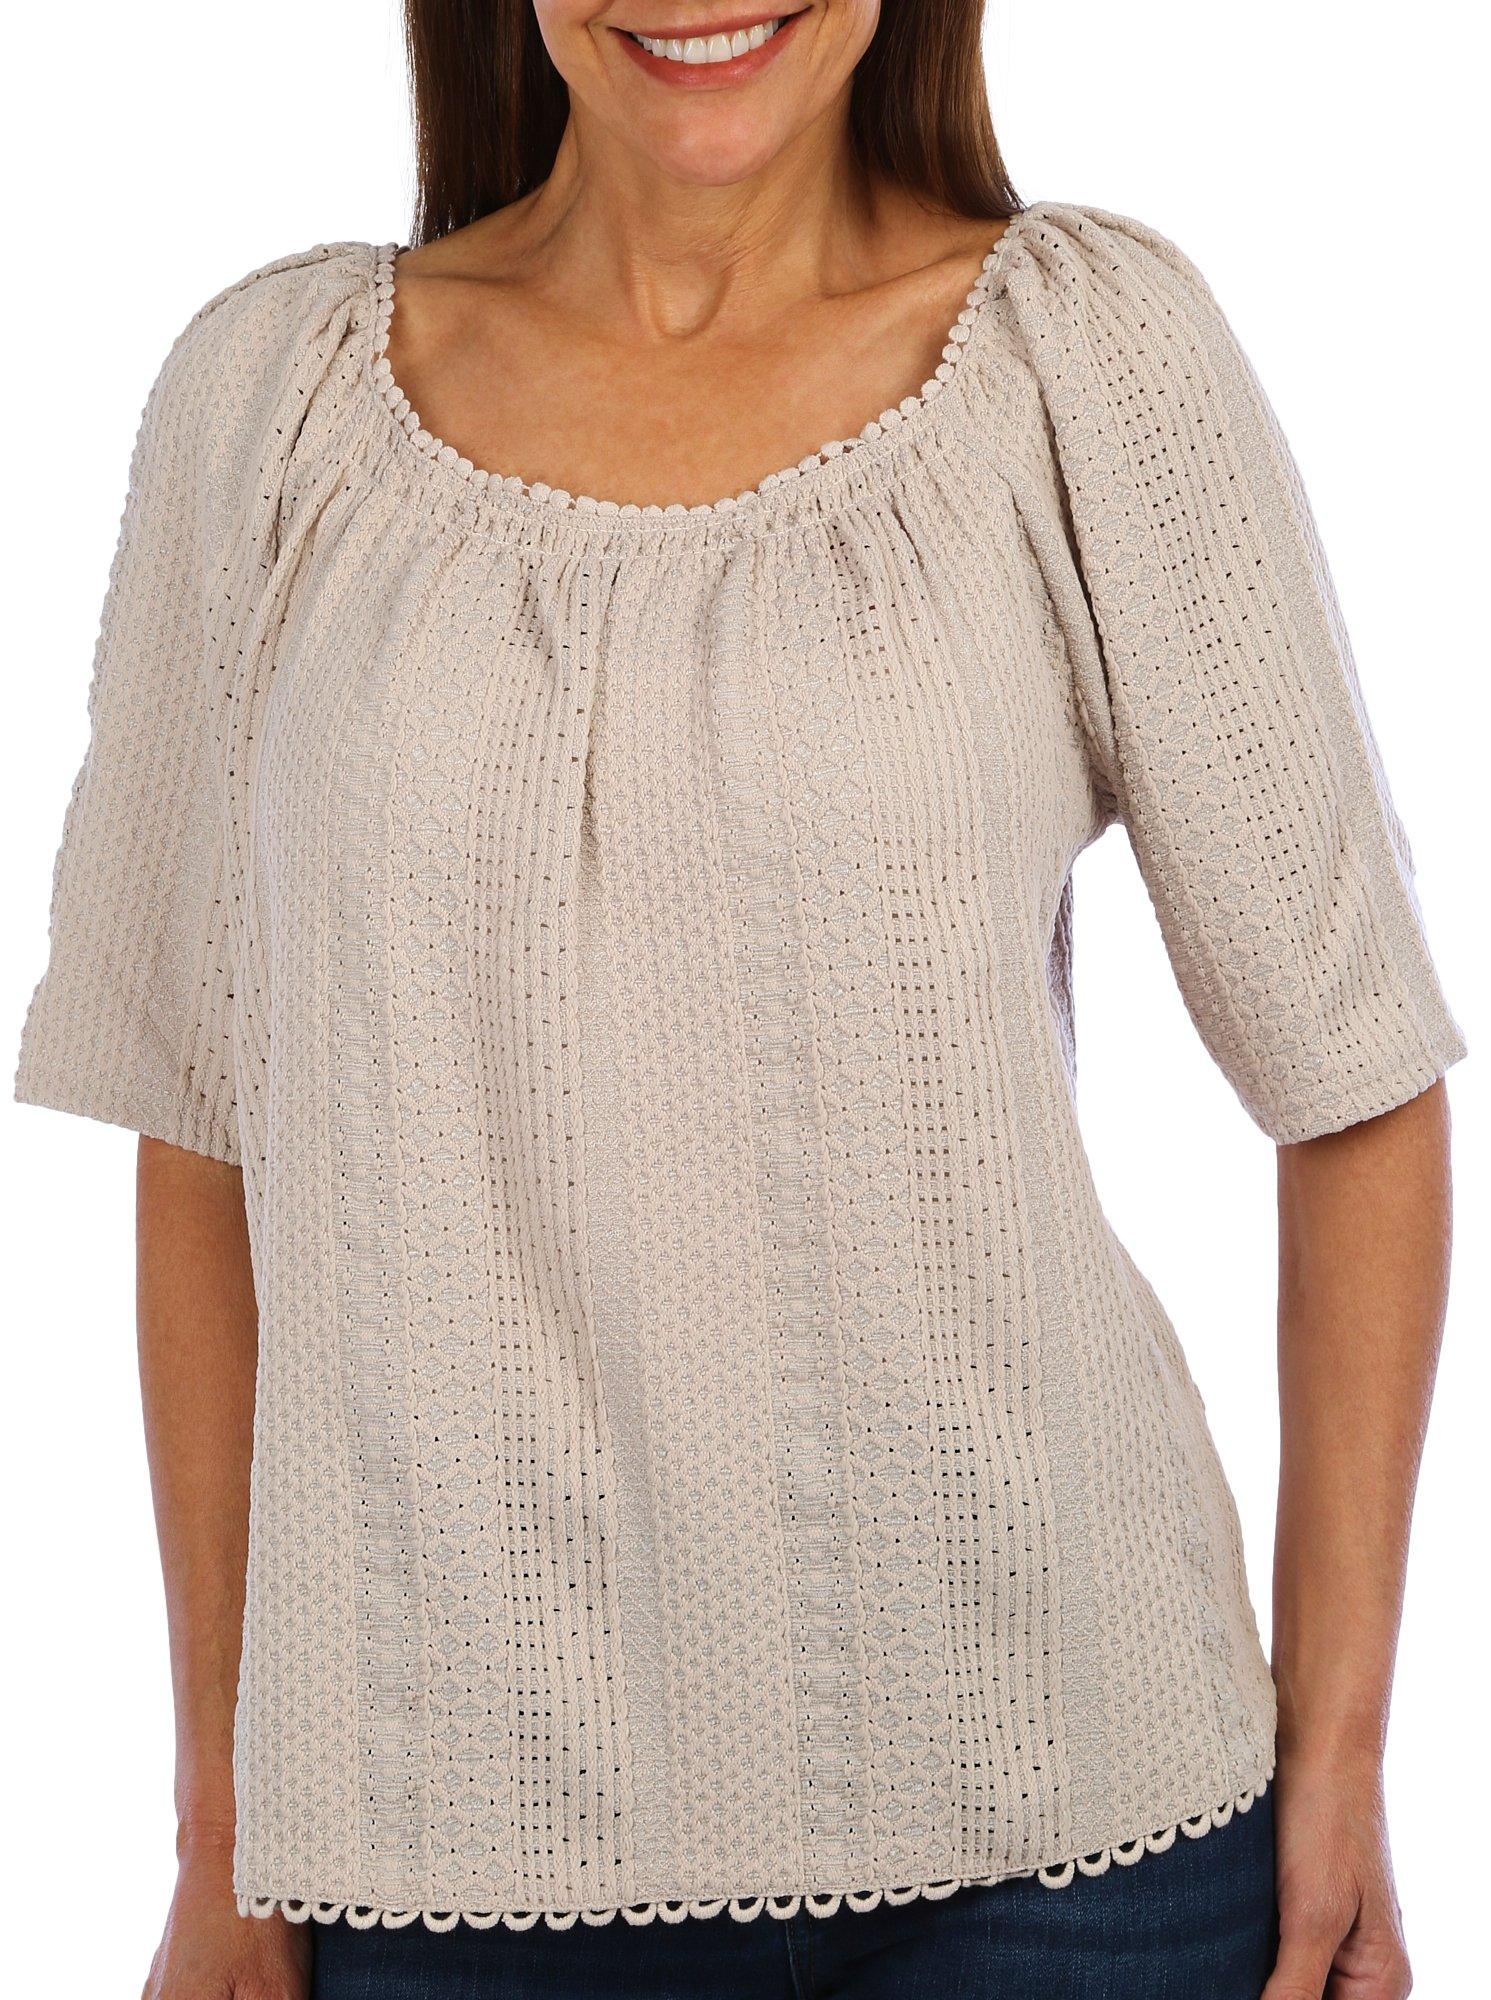 Women's Solid Eyelet Knit Top